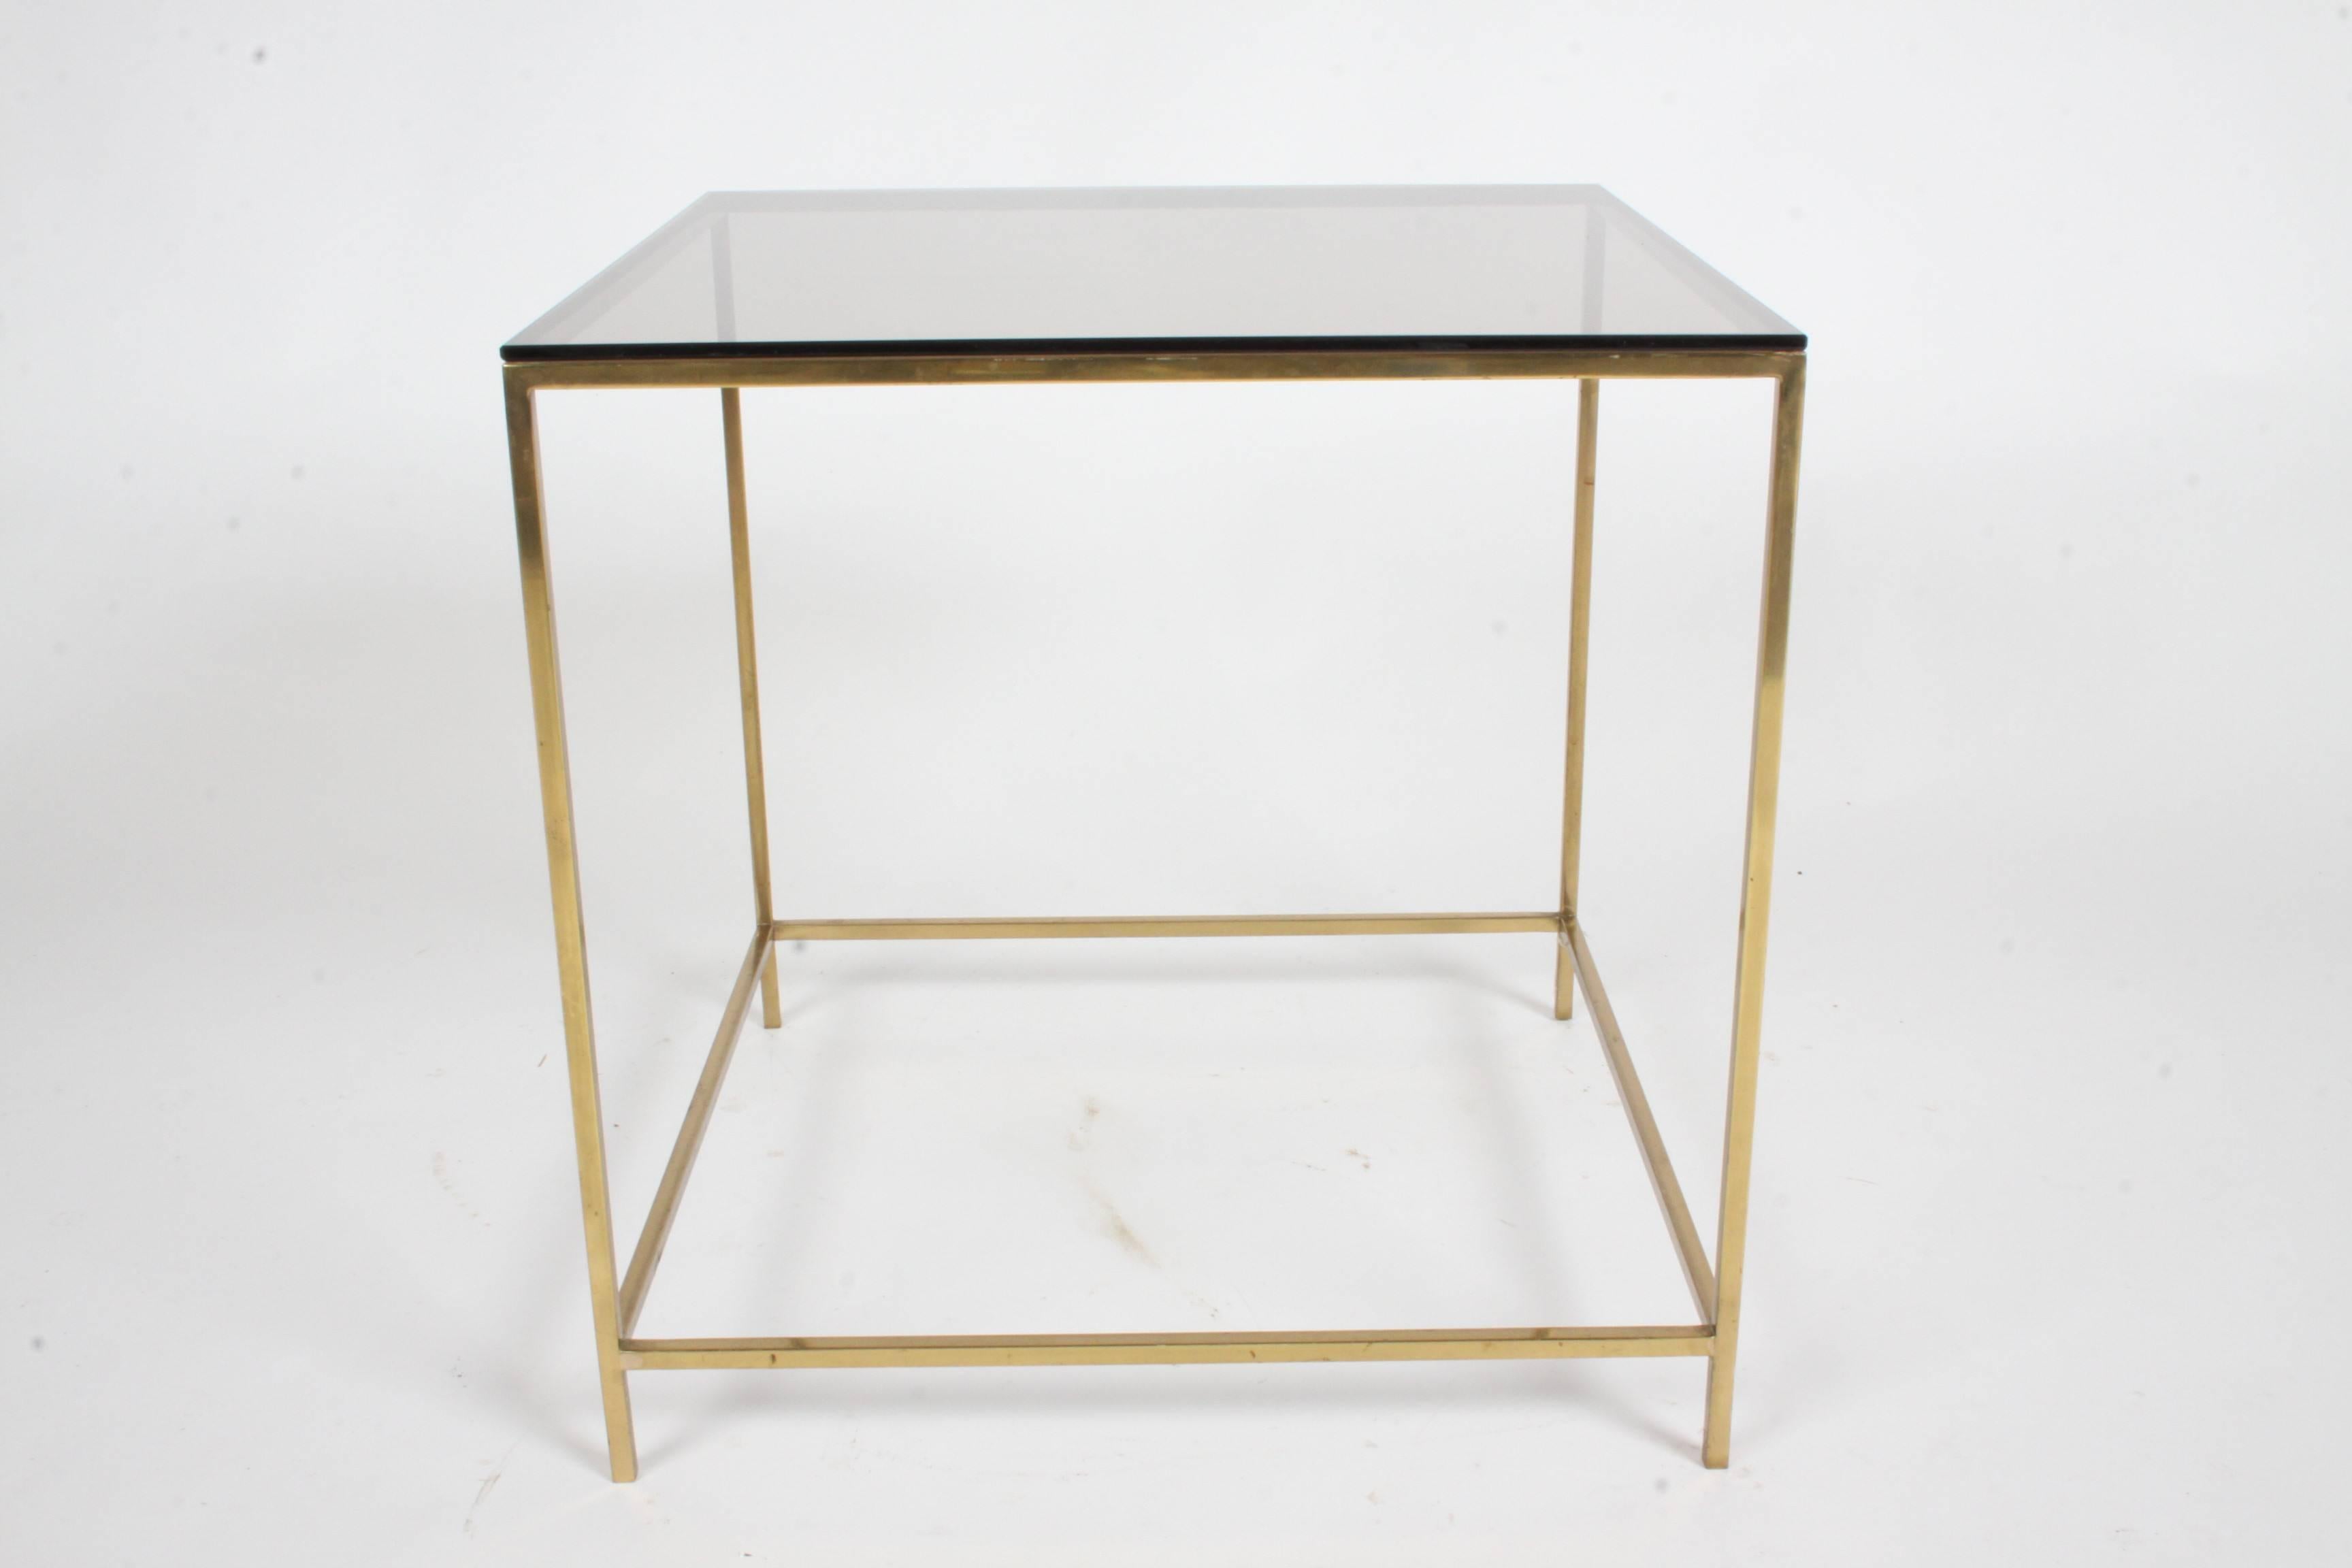 Mid-Century Modern brass and bronze glass side table, circa 1970s. Very much in the style of Paul McCobb or Milo Baughman designed pieces. Minor scratches to bronze colored glass, brass has light scuffs. Very nice example.